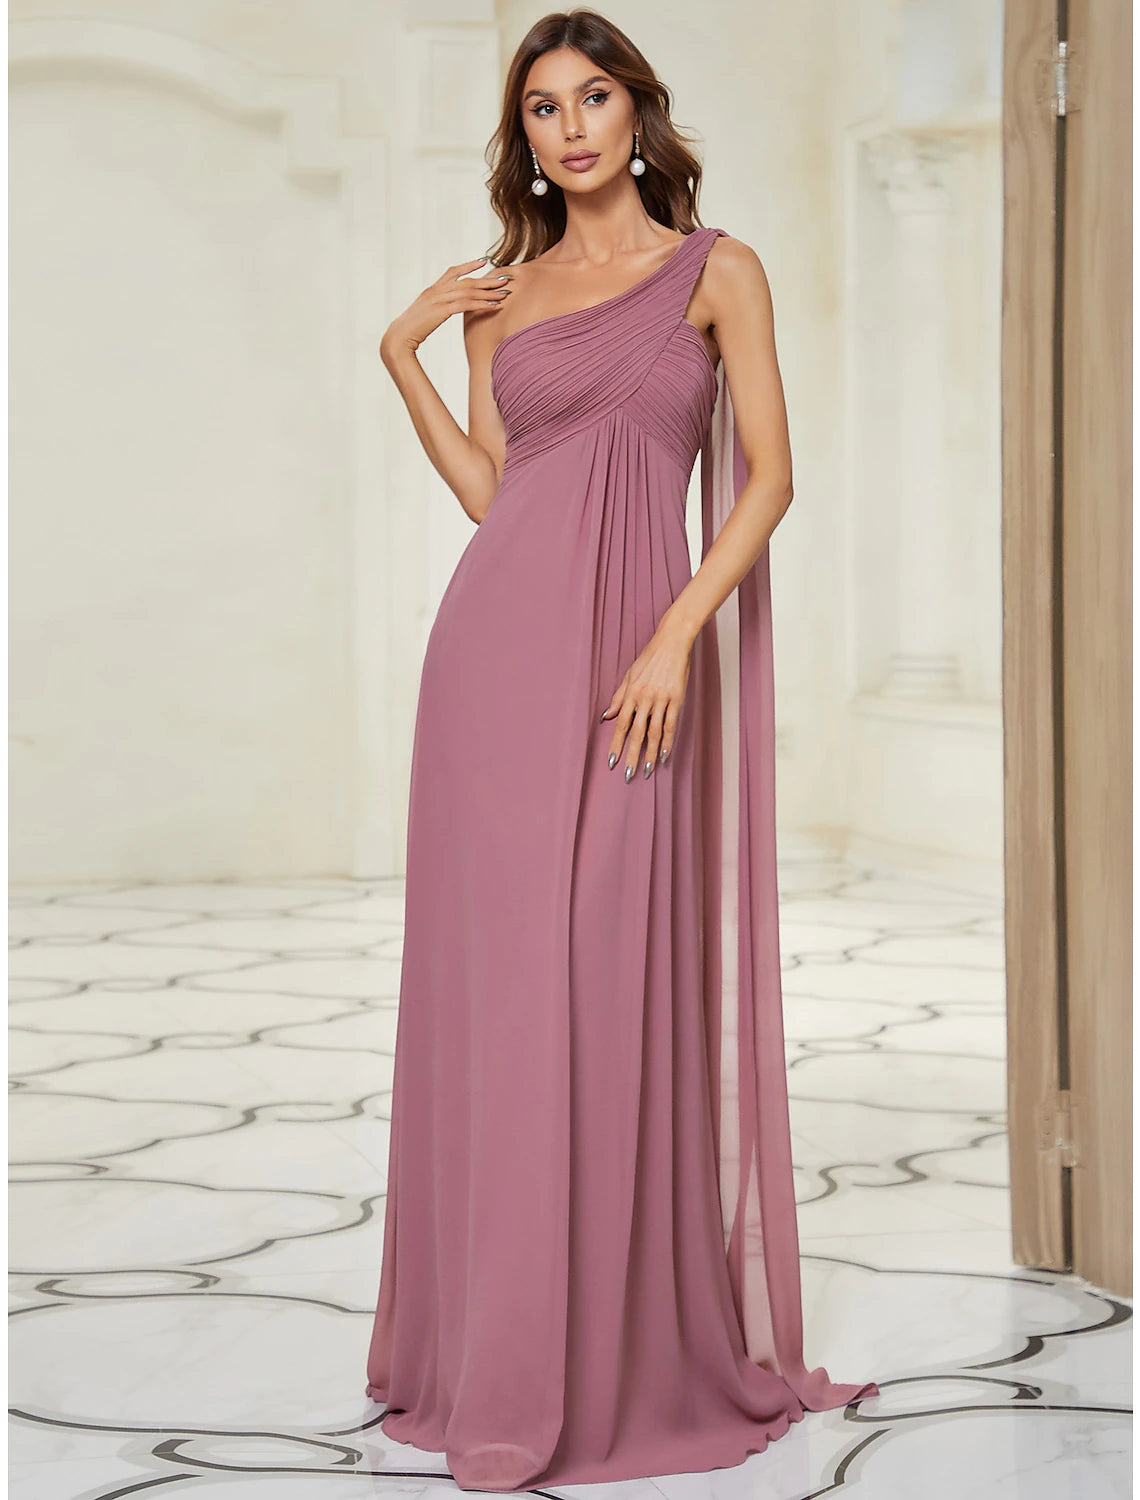 A-Line Evening Gown Empire Dress Formal Evening Floor Length Sleeveless One Shoulder Bridesmaid Dress Chiffon Backless with Pleats Draping